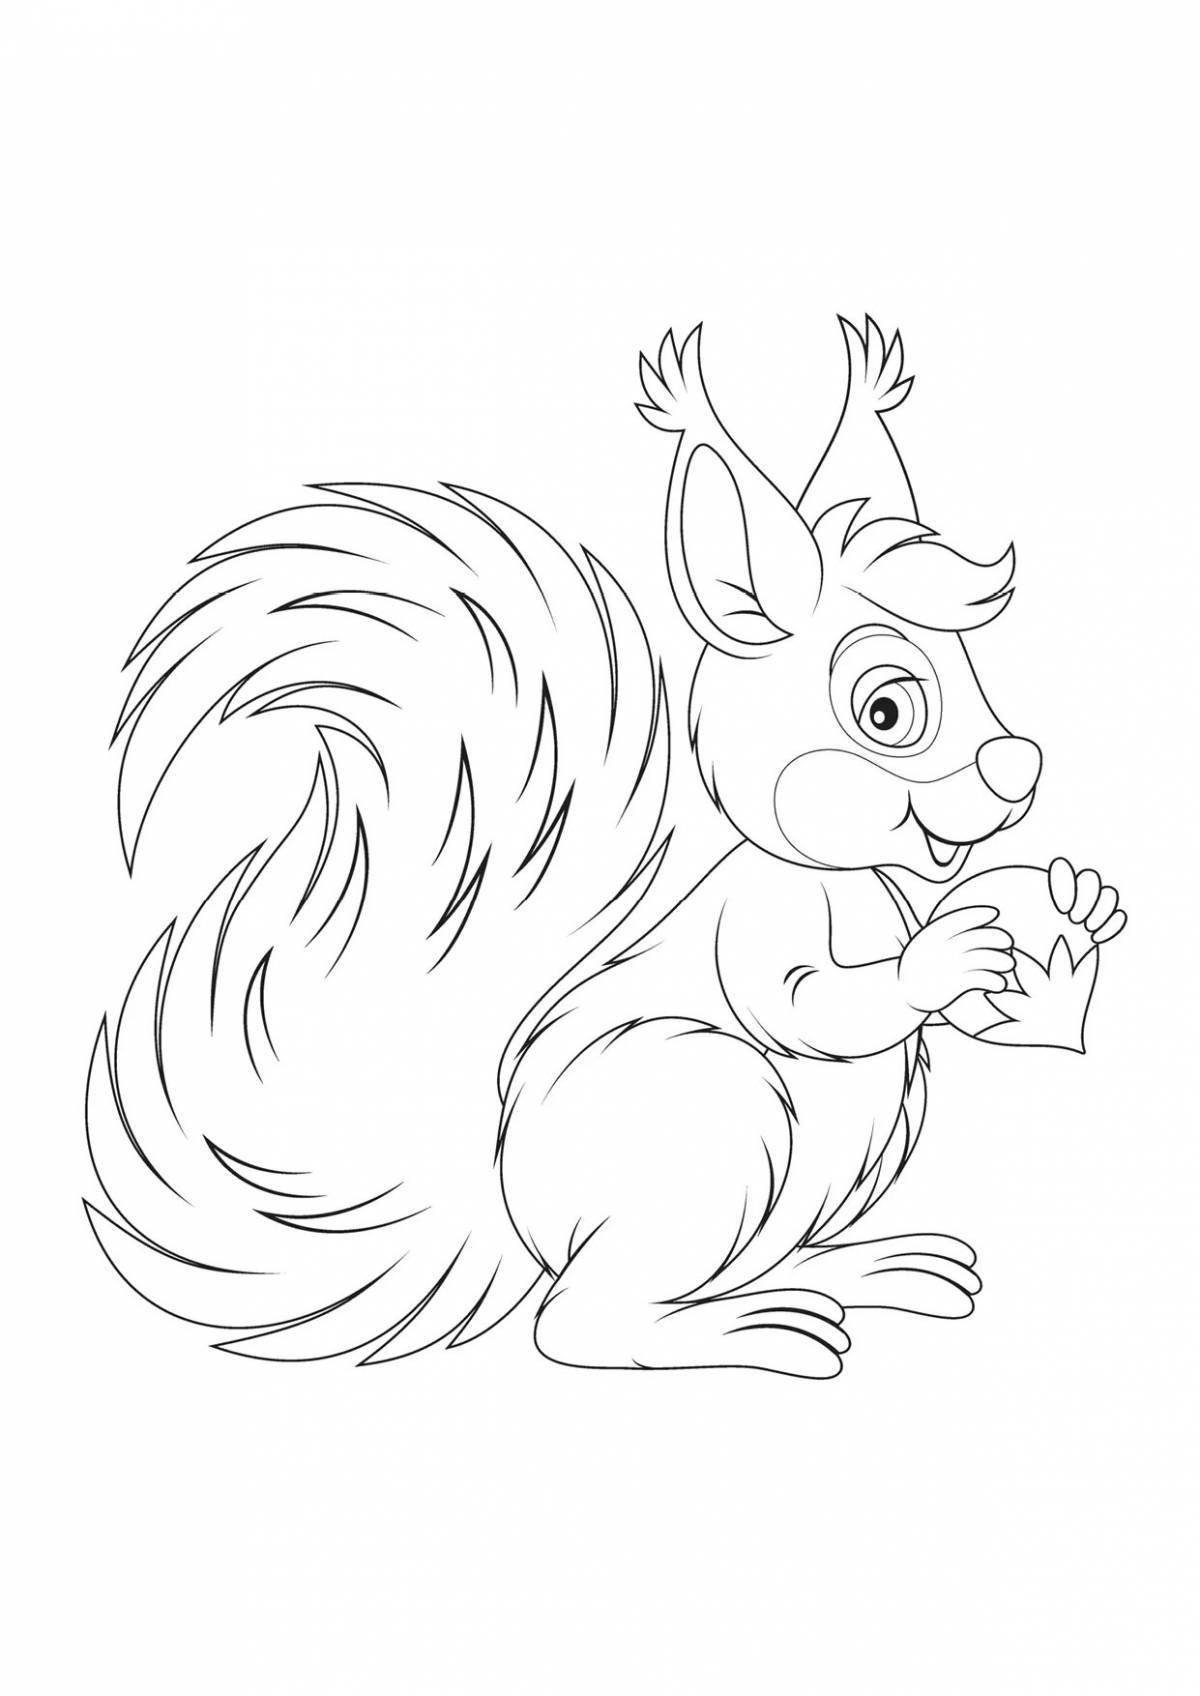 Cute squirrel coloring book for 2-3 year olds